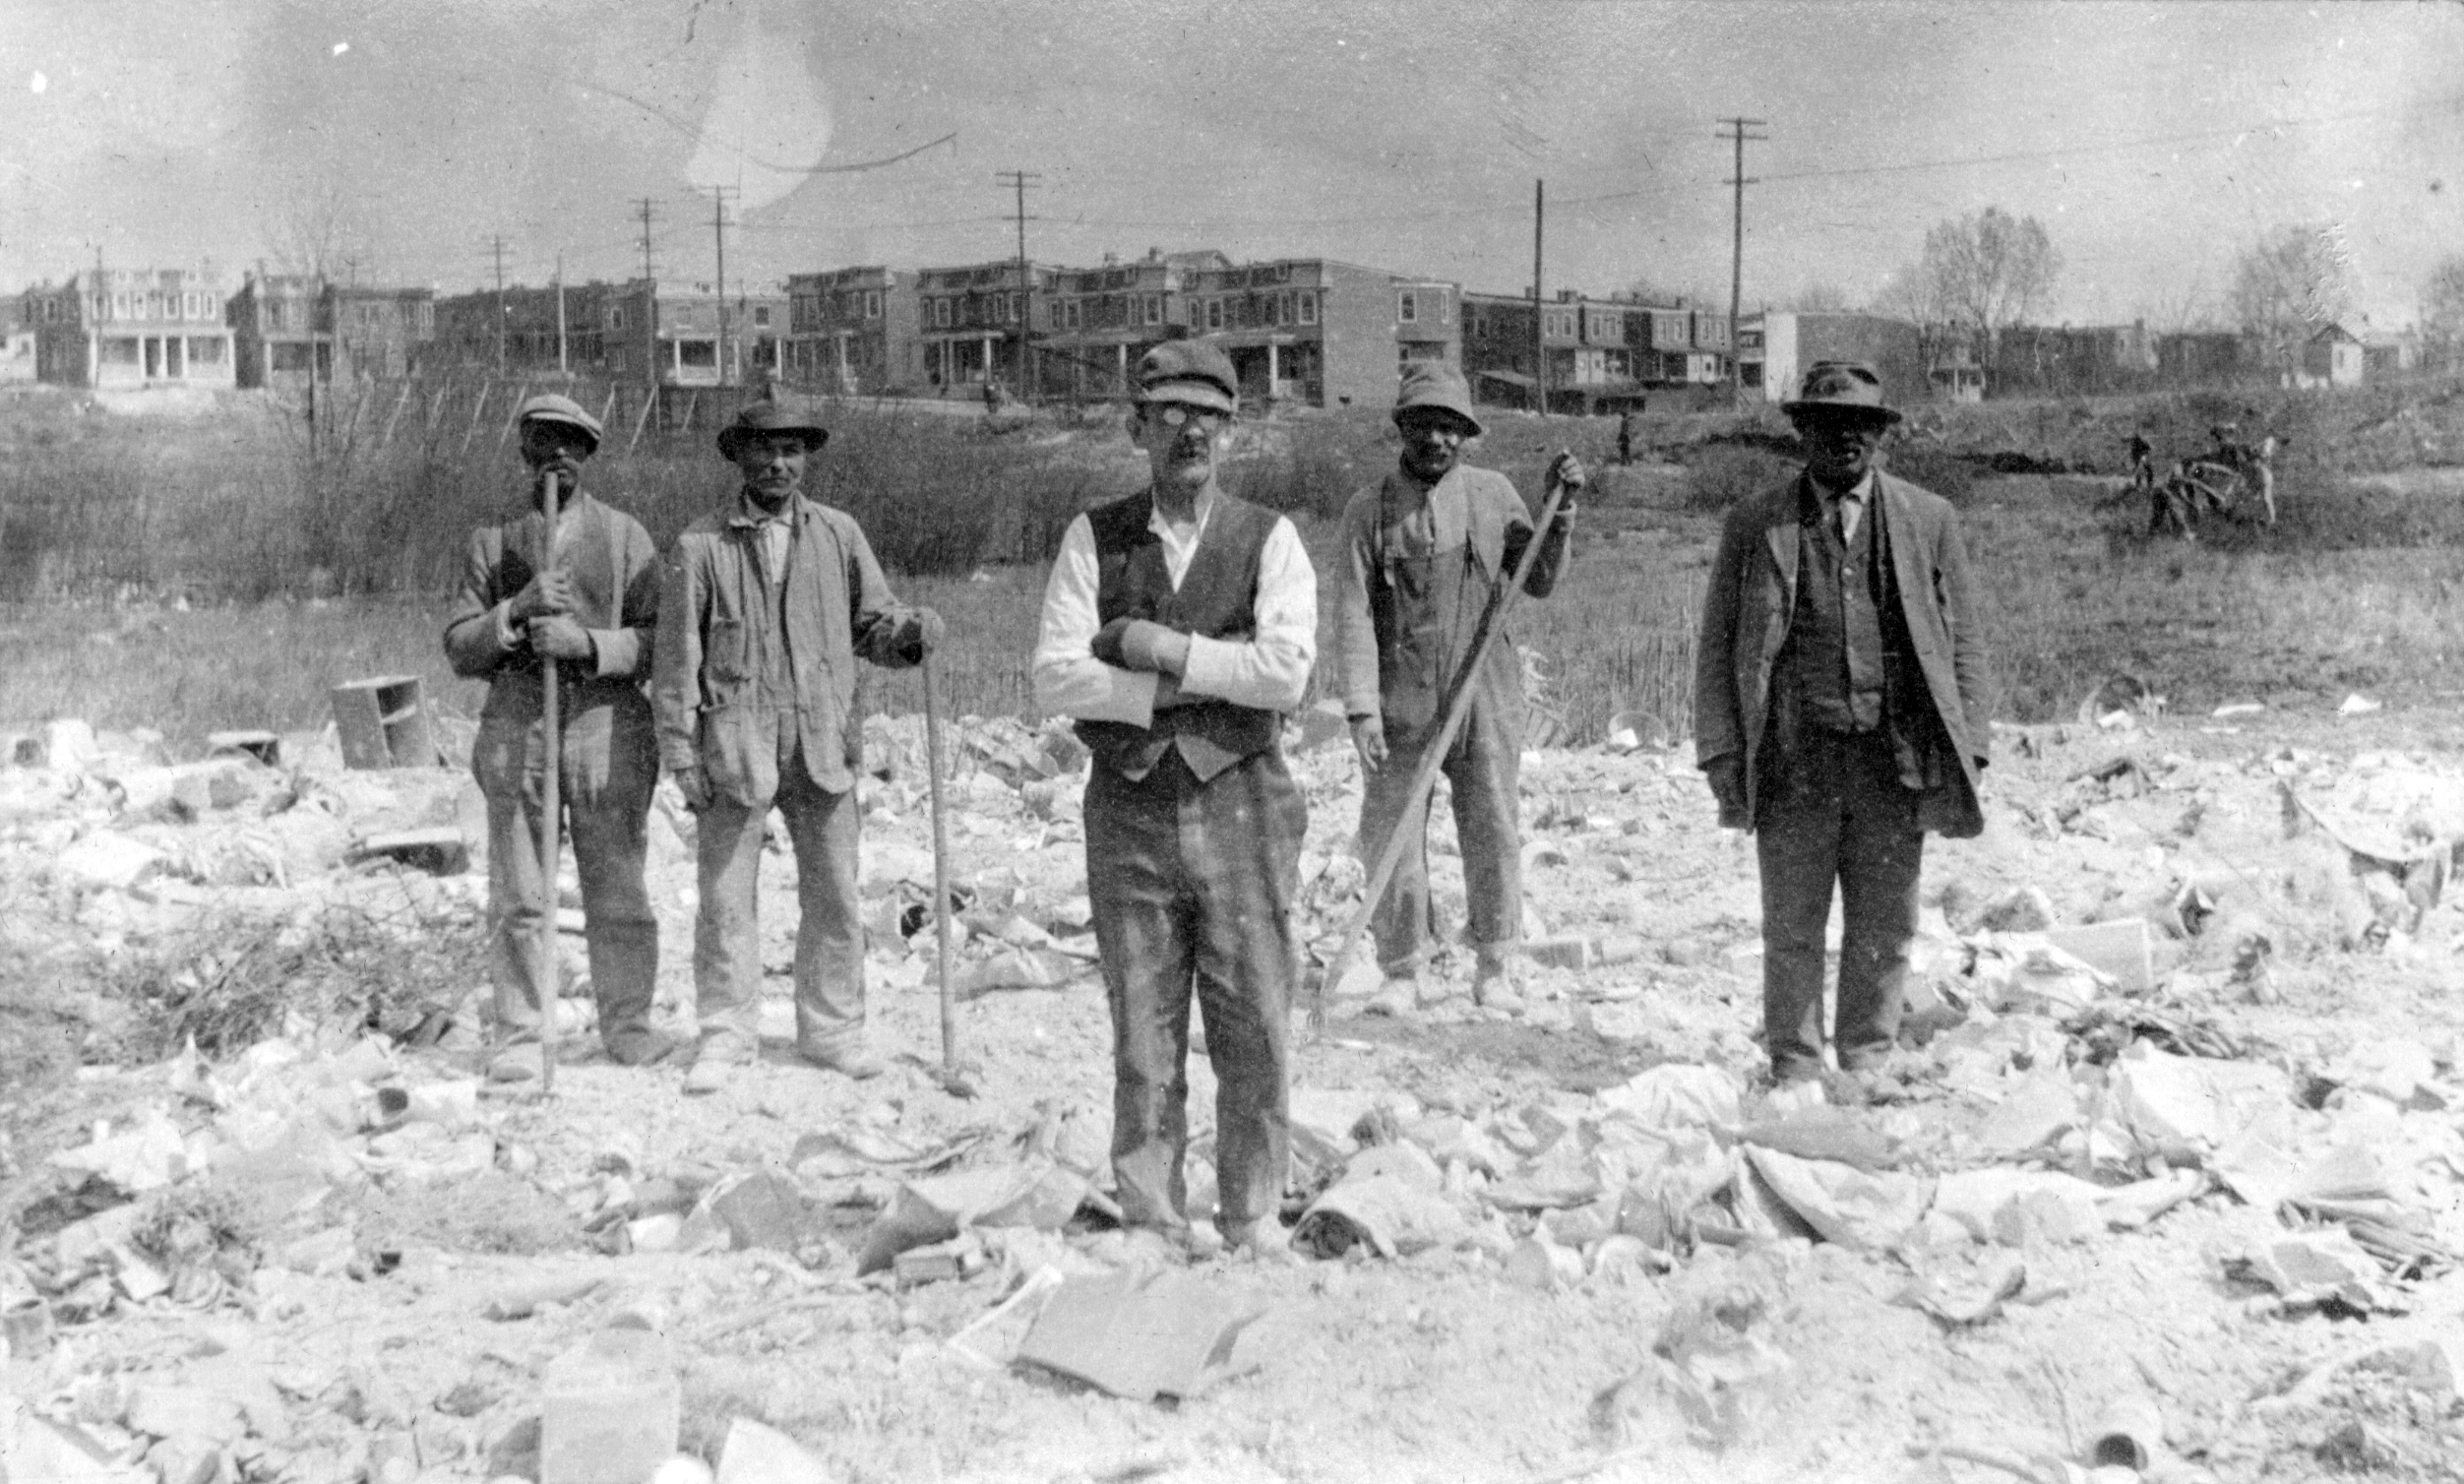 Black and white image of workmen on a cleared construction site.